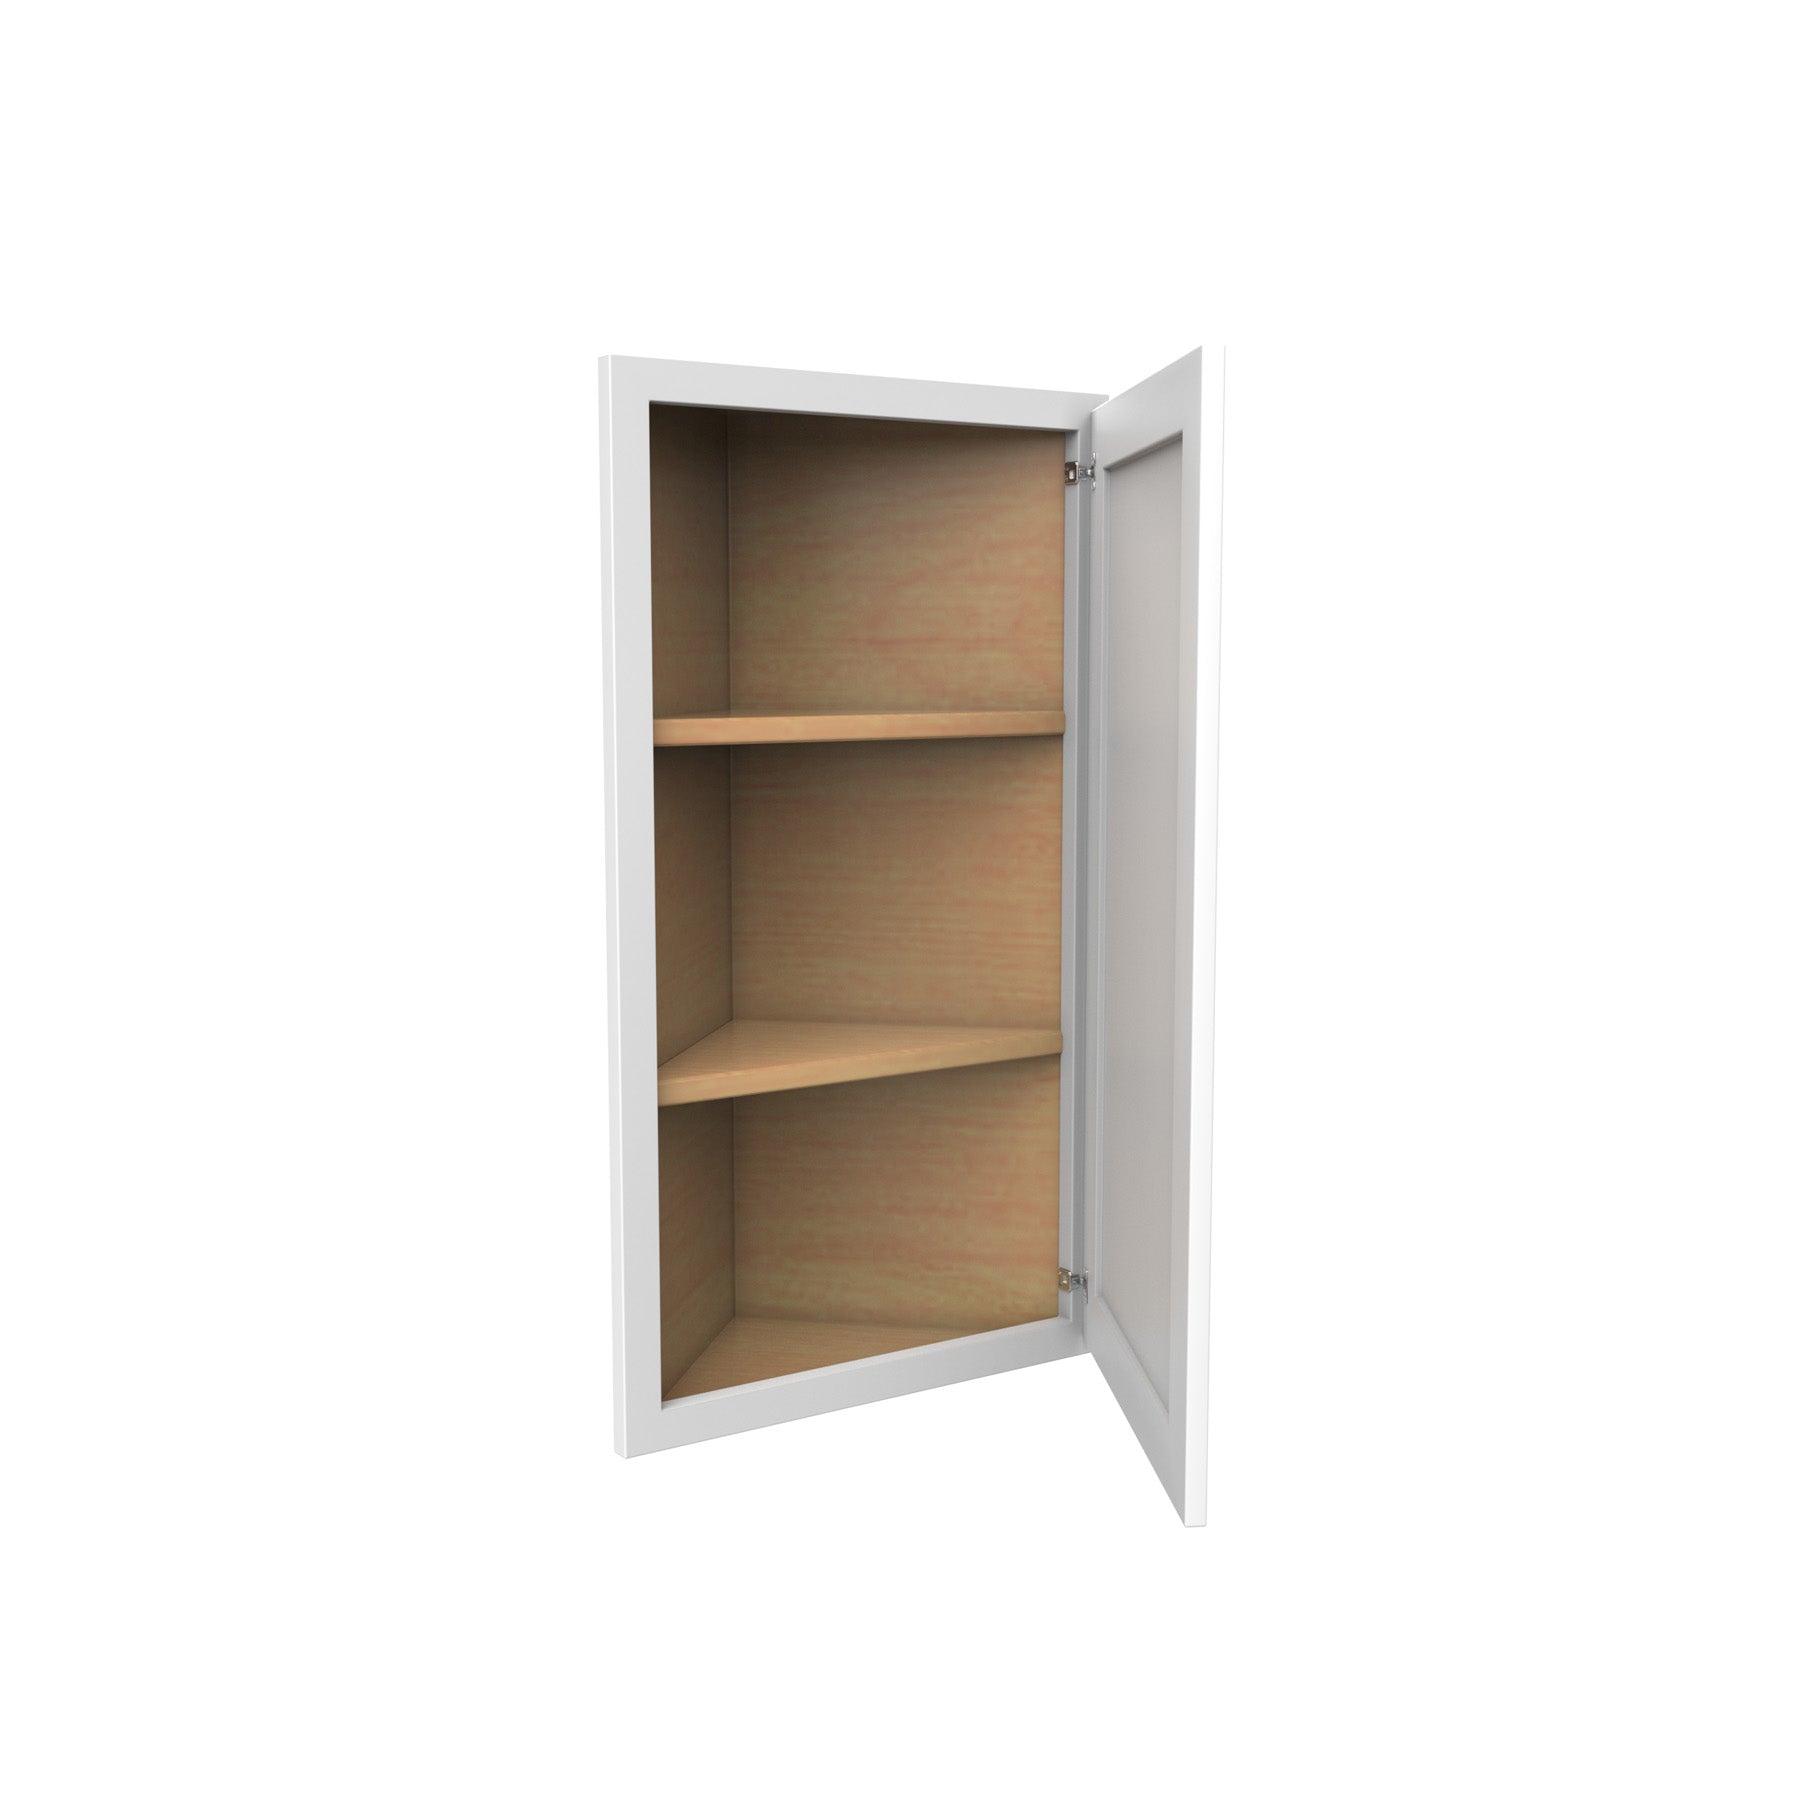 30 Inch High Wall End Shelf Cabinet - Luxor White Shaker - Ready To Assemble, 12"W x 30"H x 12"D